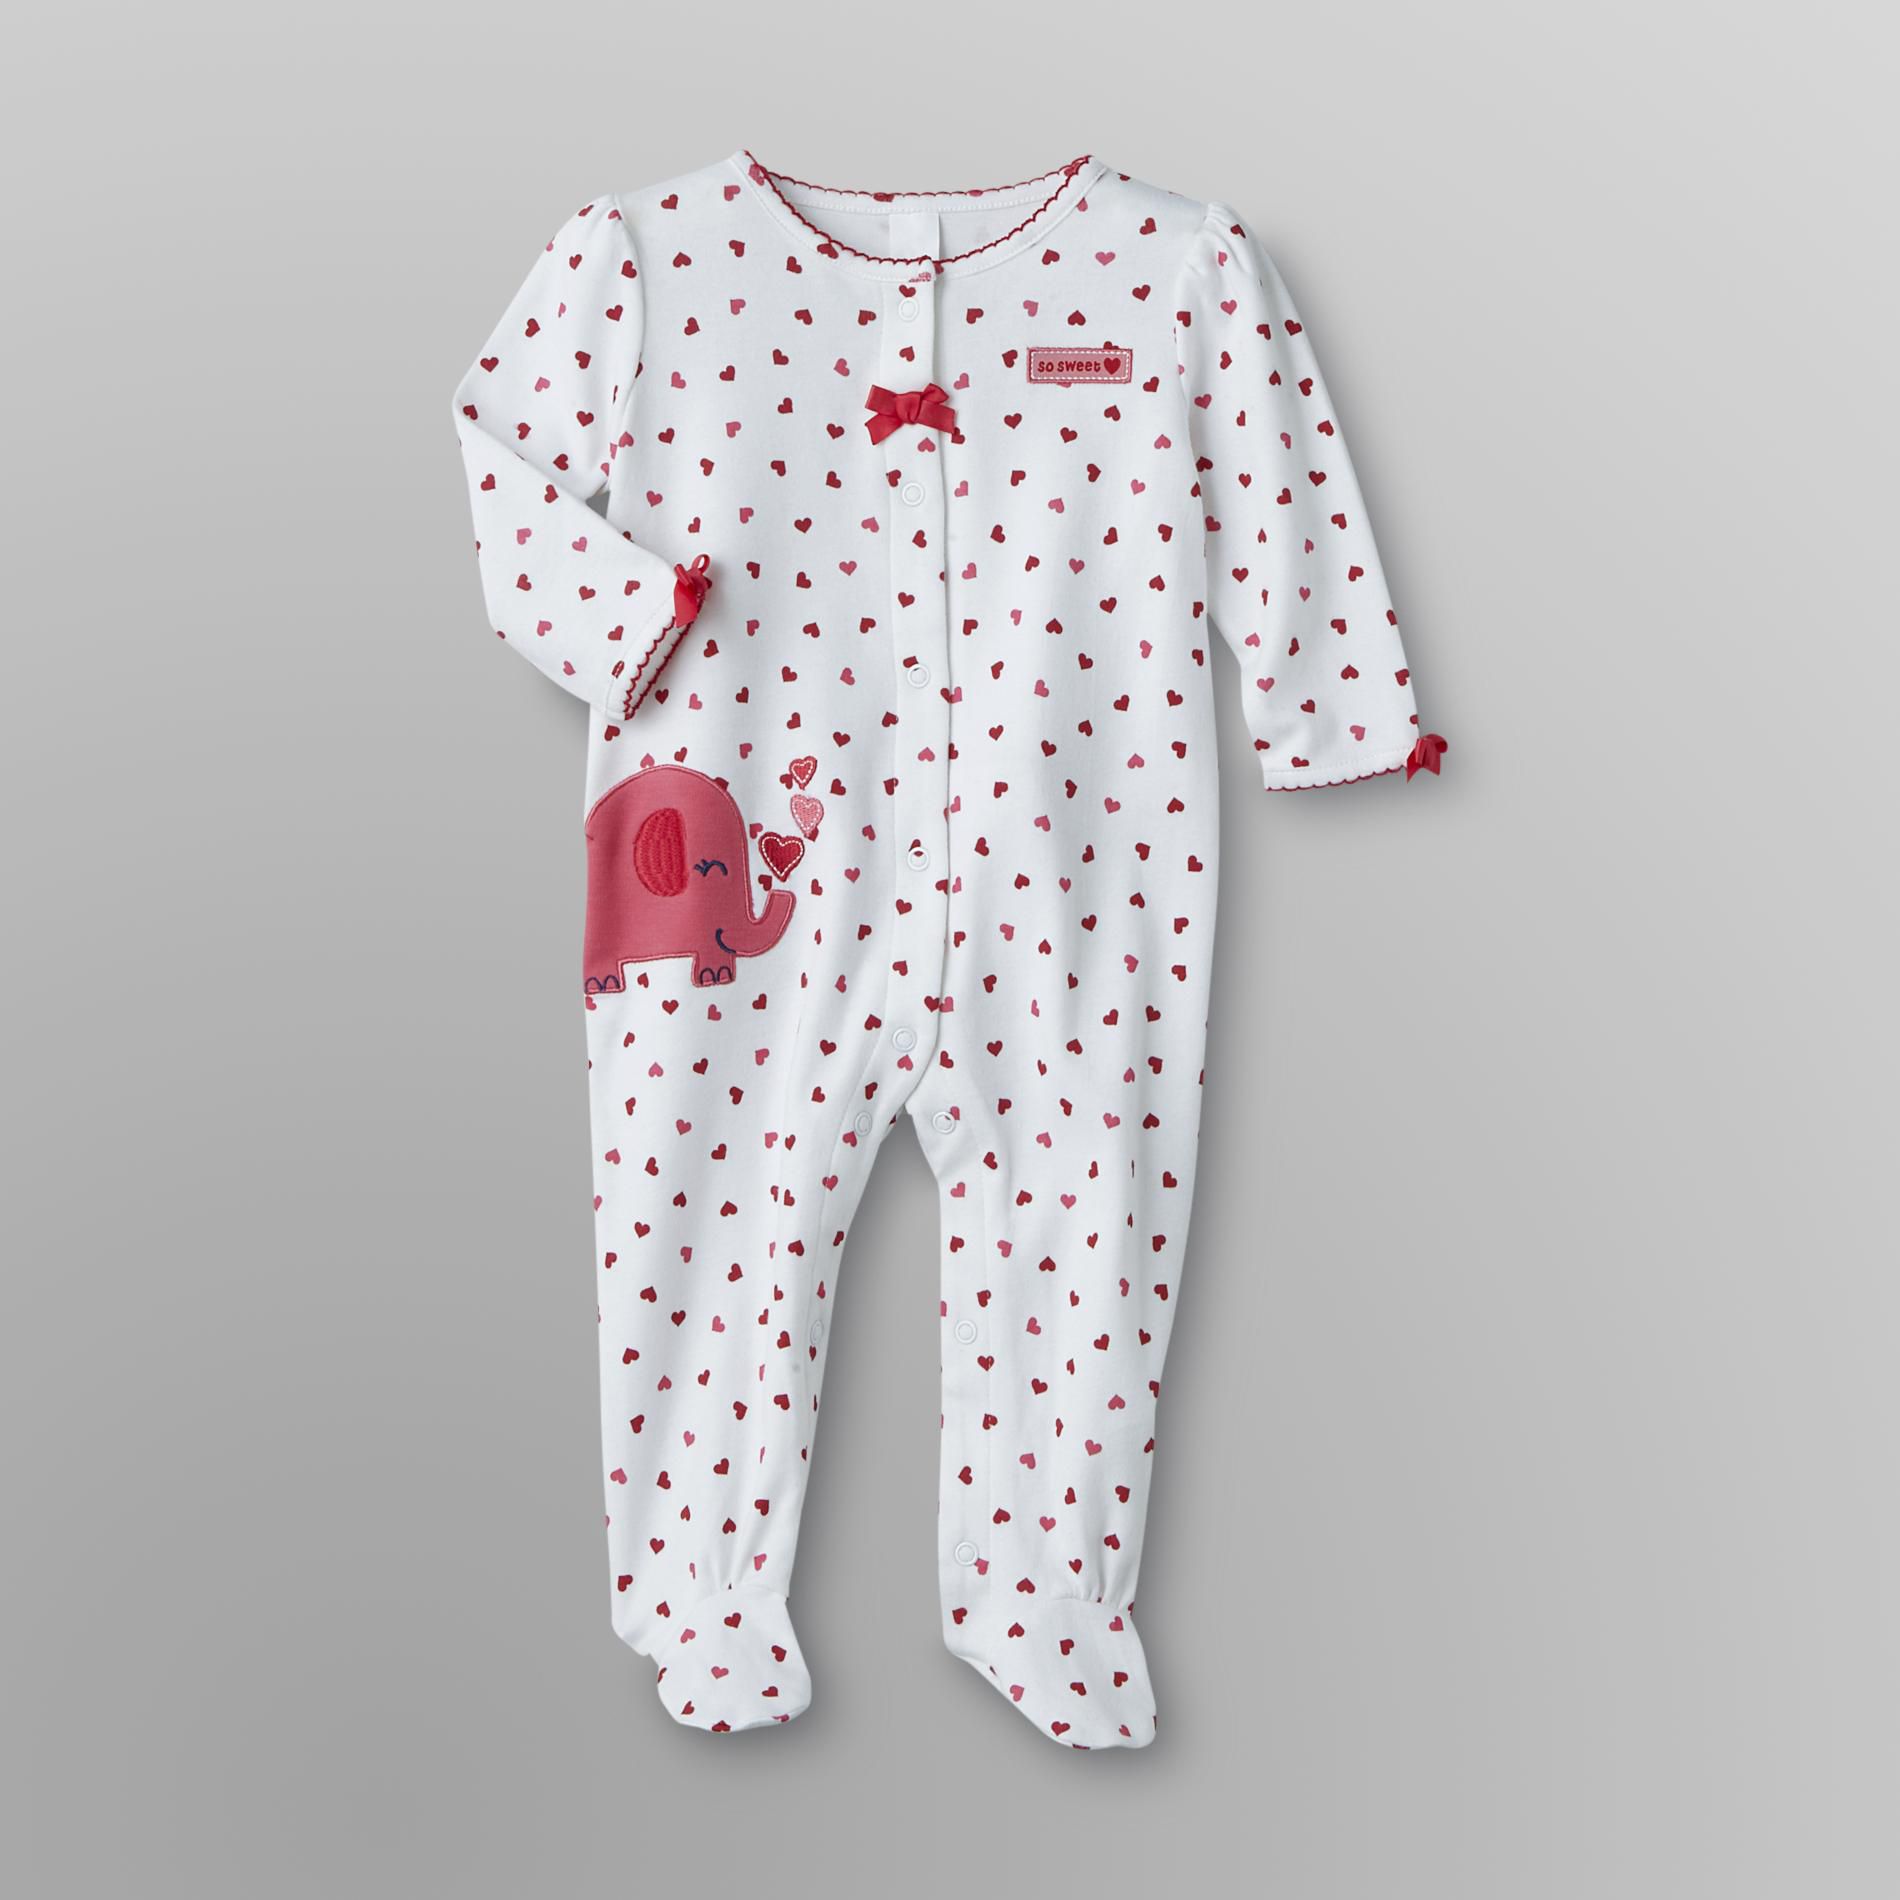 Little Wonders Infant Girls Footed Pajamas - Hearts